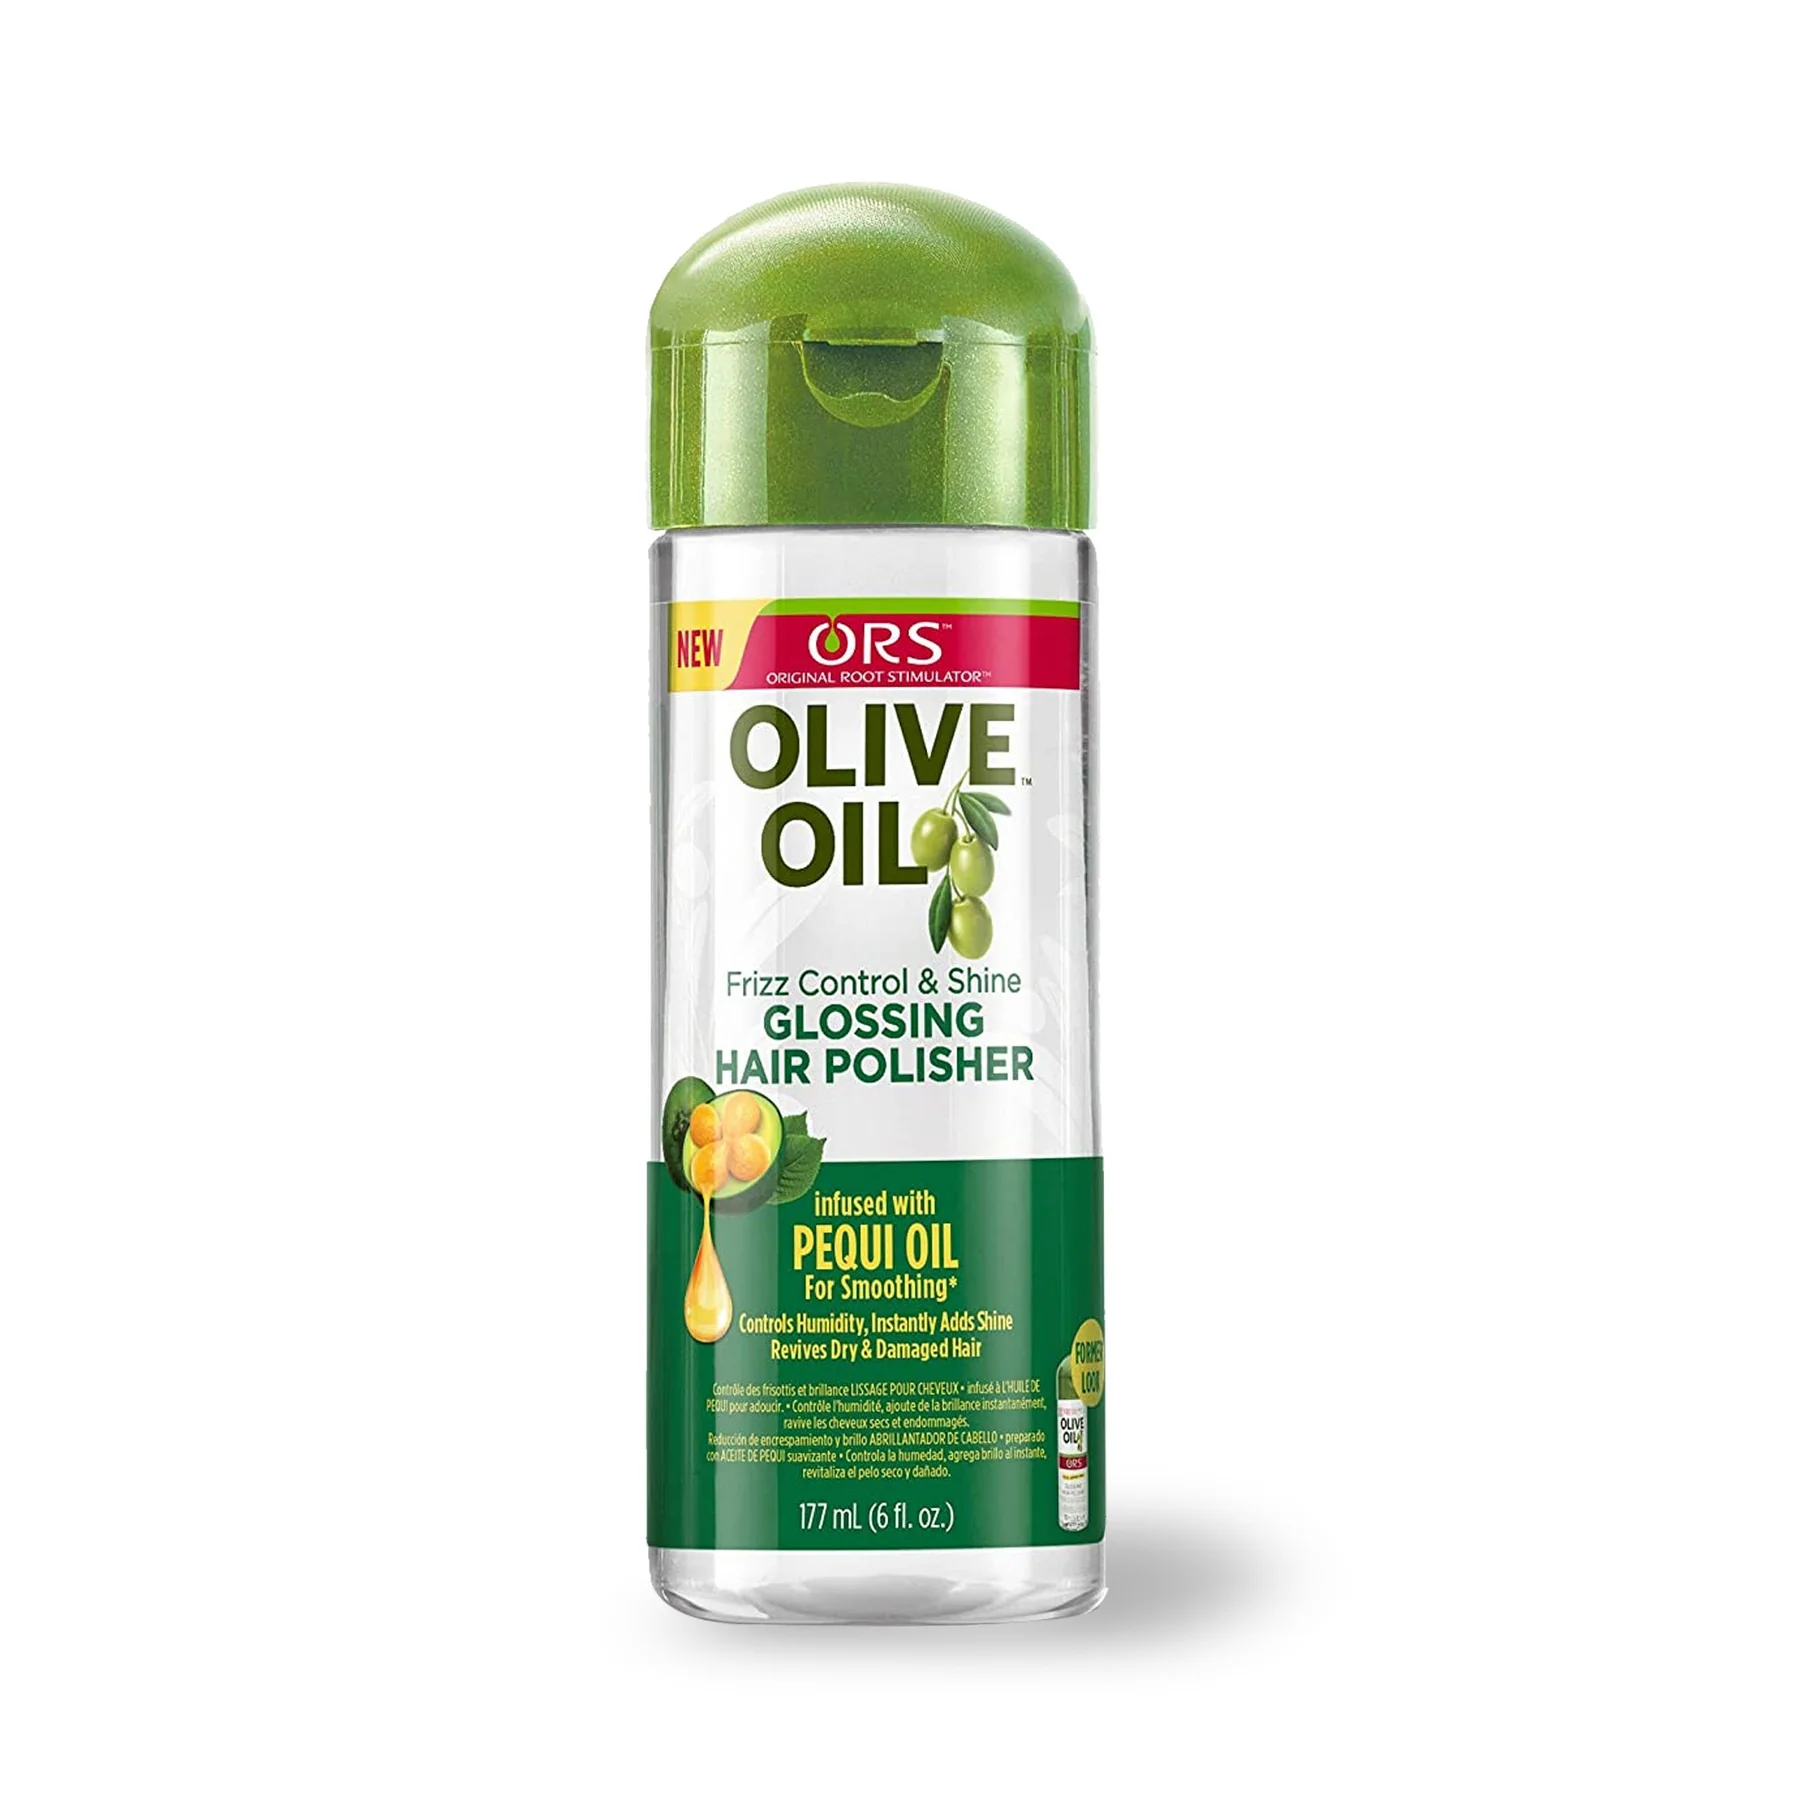 ORS Olive Oil Glossing Hair Polisher Oil with Pequi Oil for Smoothing, Frizz Control & Shine, 6 fl oz - image 4 of 4